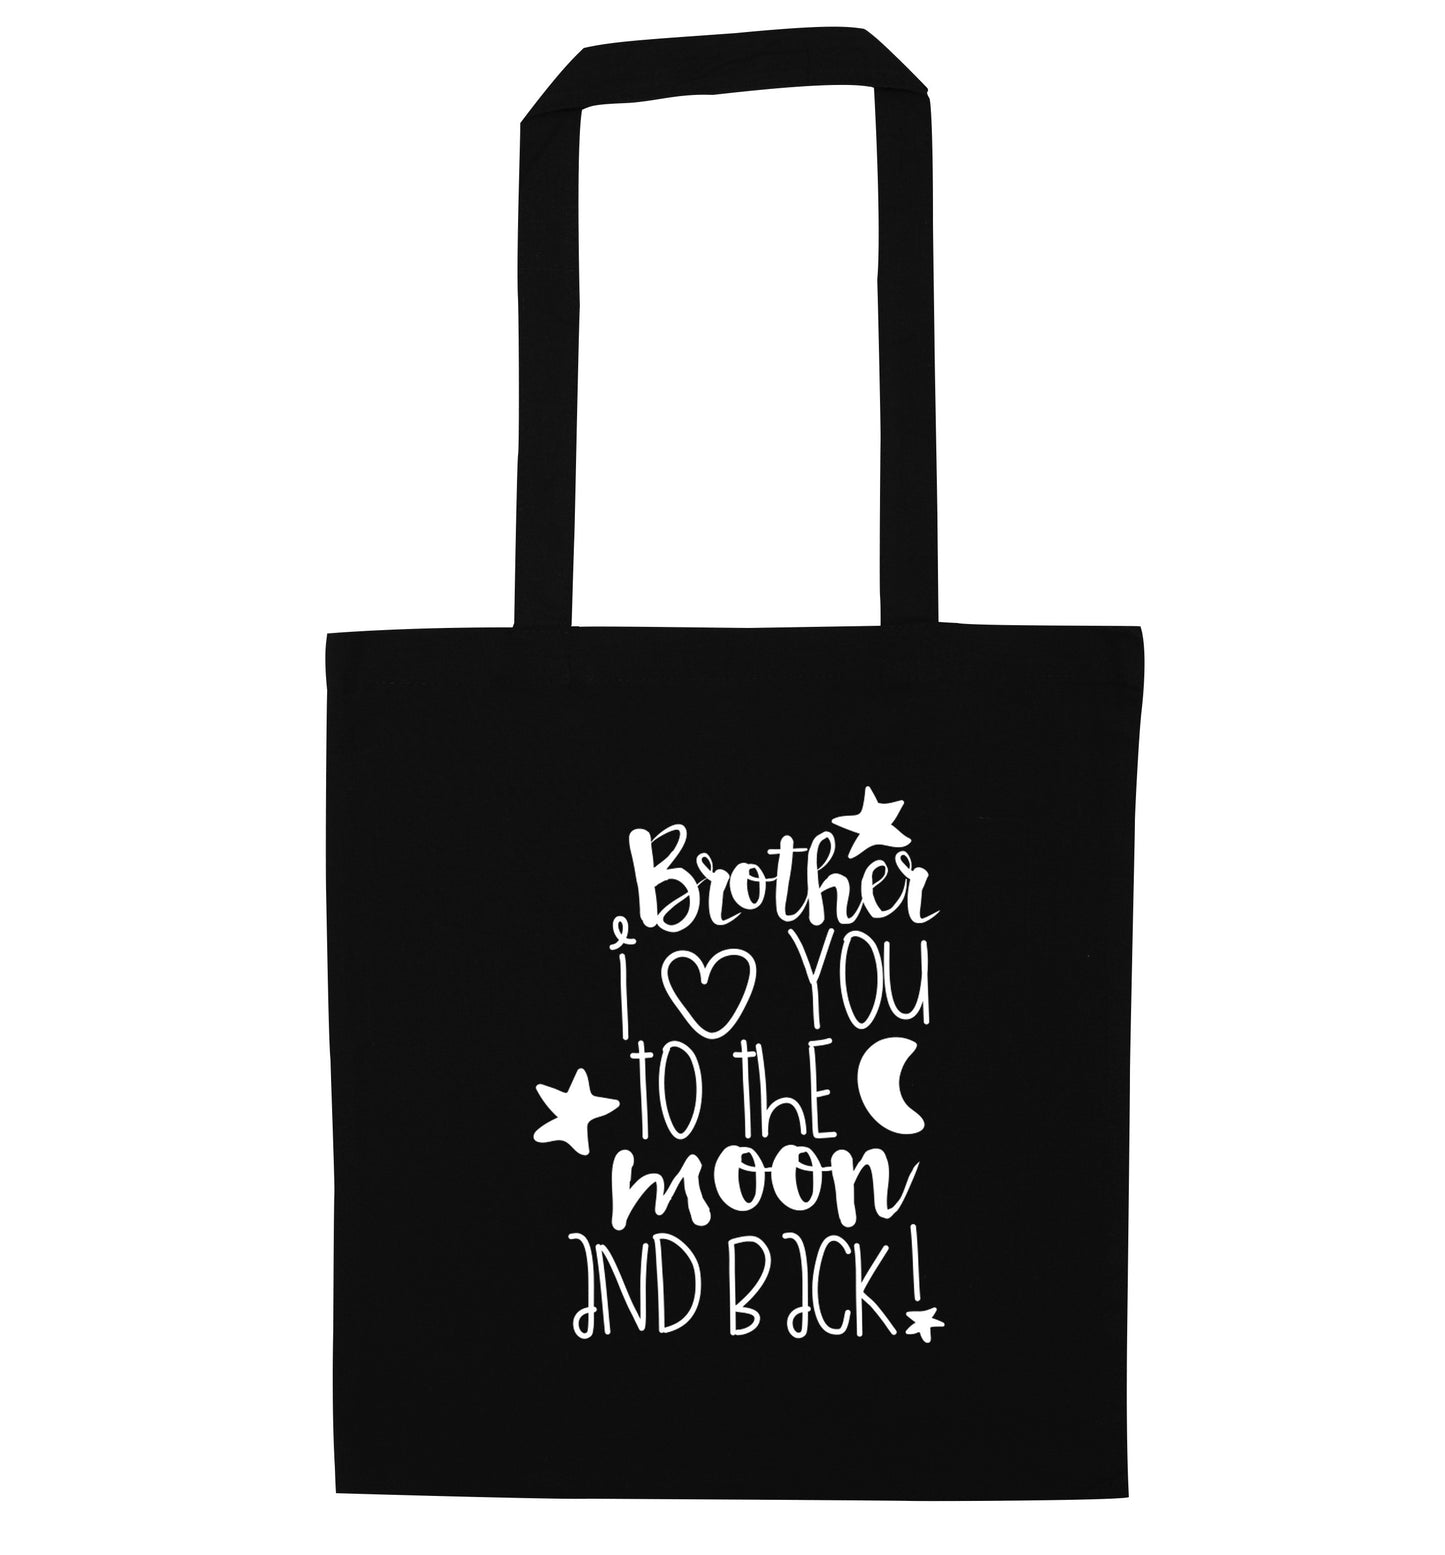 Brother I love you to the moon and back black tote bag